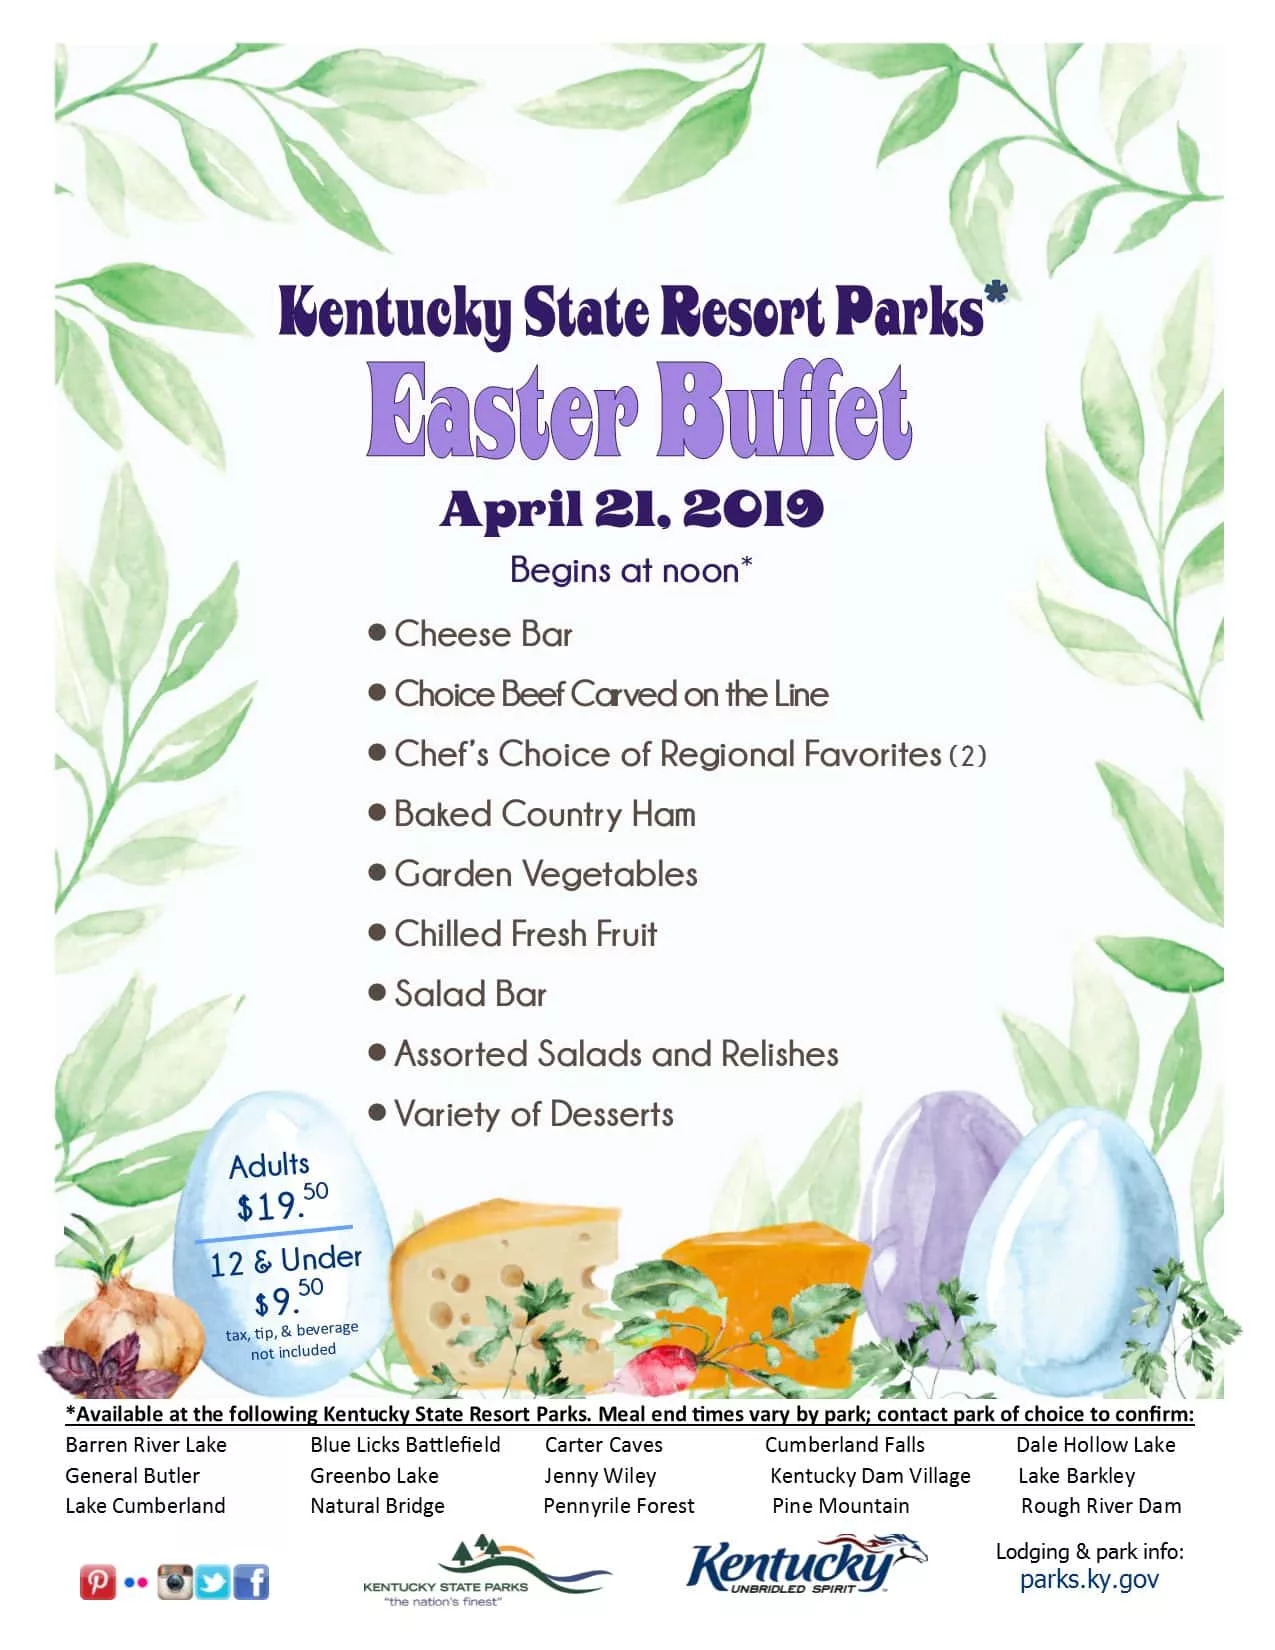 ky-state-parks-easterbuffet-2019-2